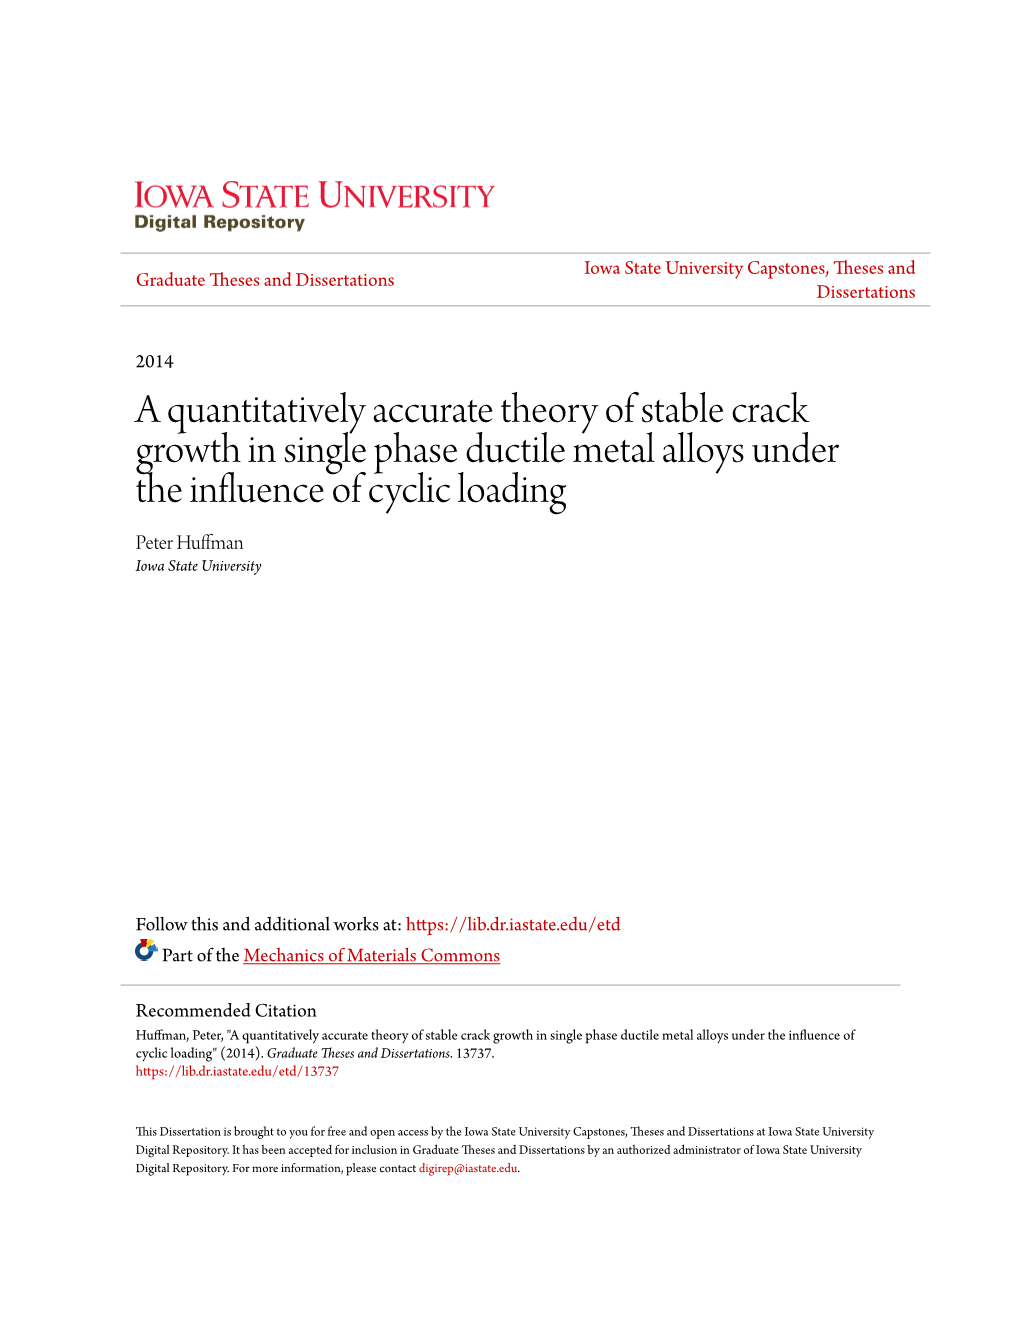 A Quantitatively Accurate Theory of Stable Crack Growth in Single Phase Ductile Metal Alloys Under the Influence of Cyclic Loading Peter Huffman Iowa State University